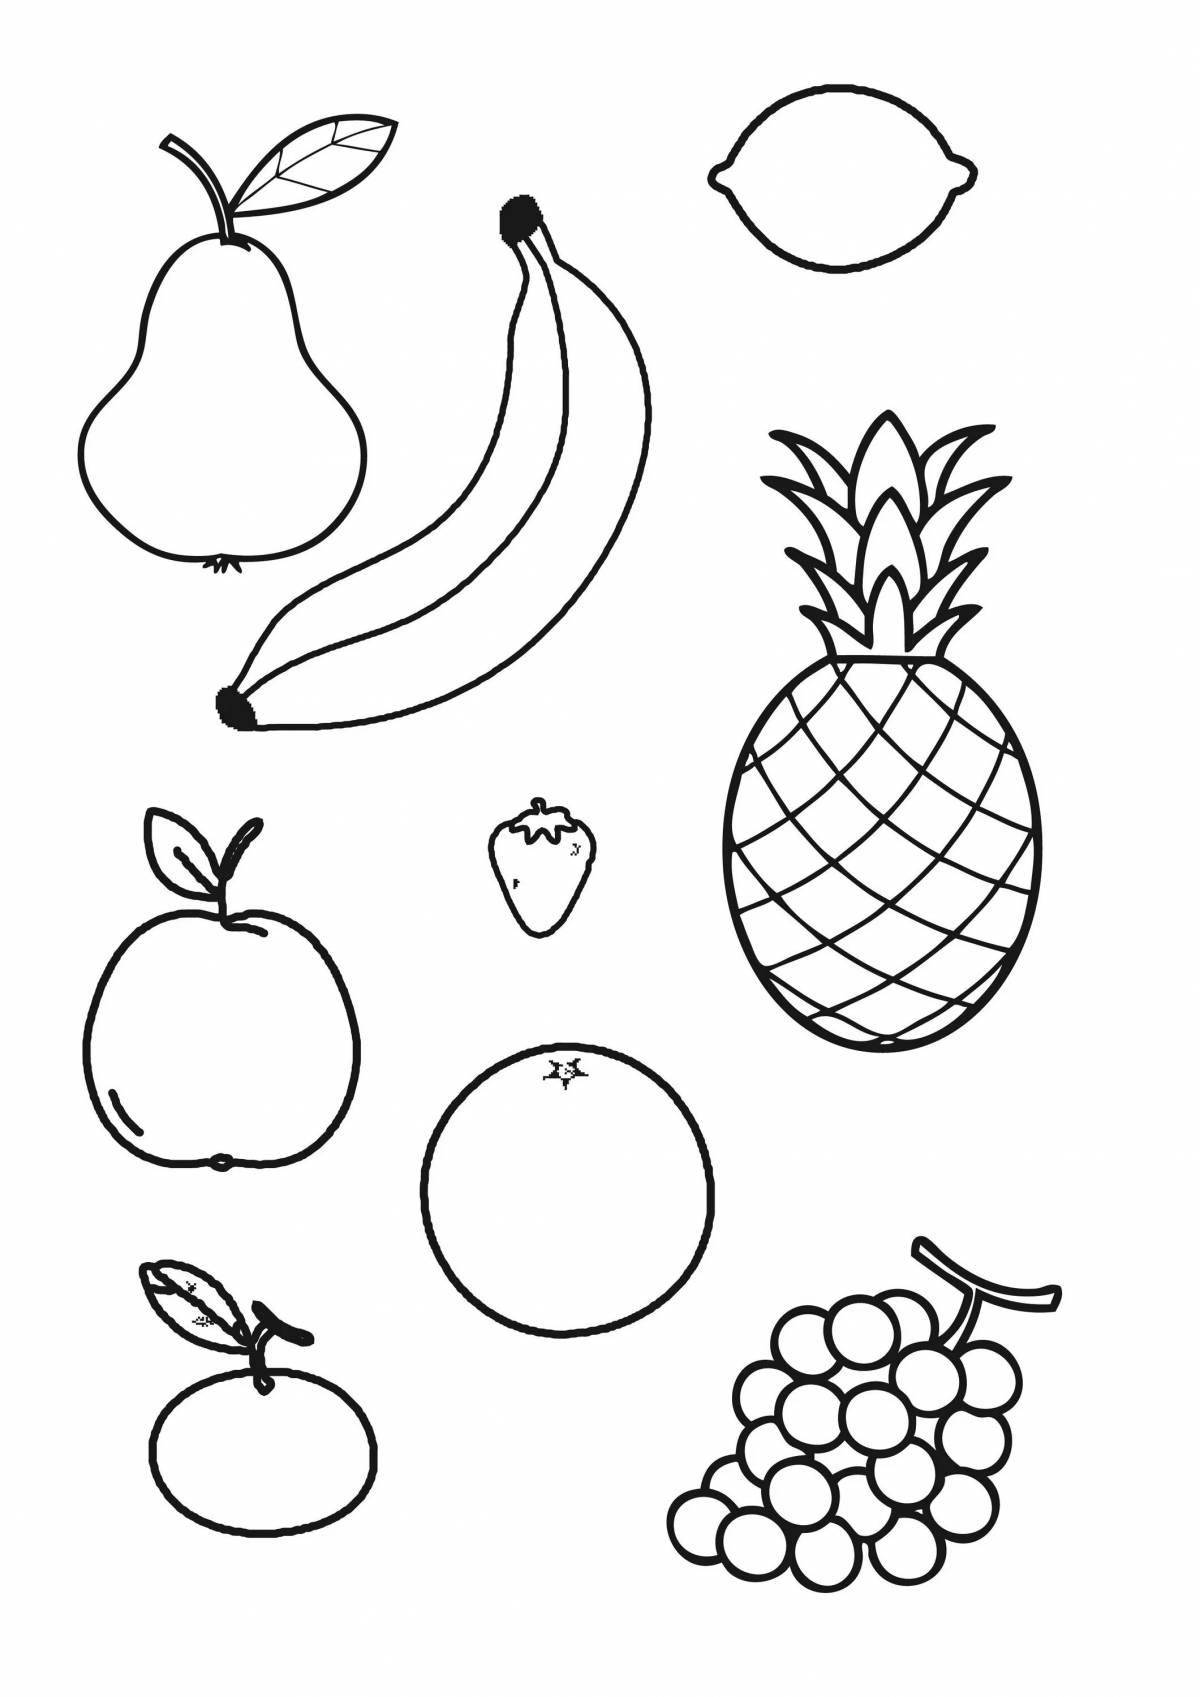 Appetizing fruit and vegetable coloring book